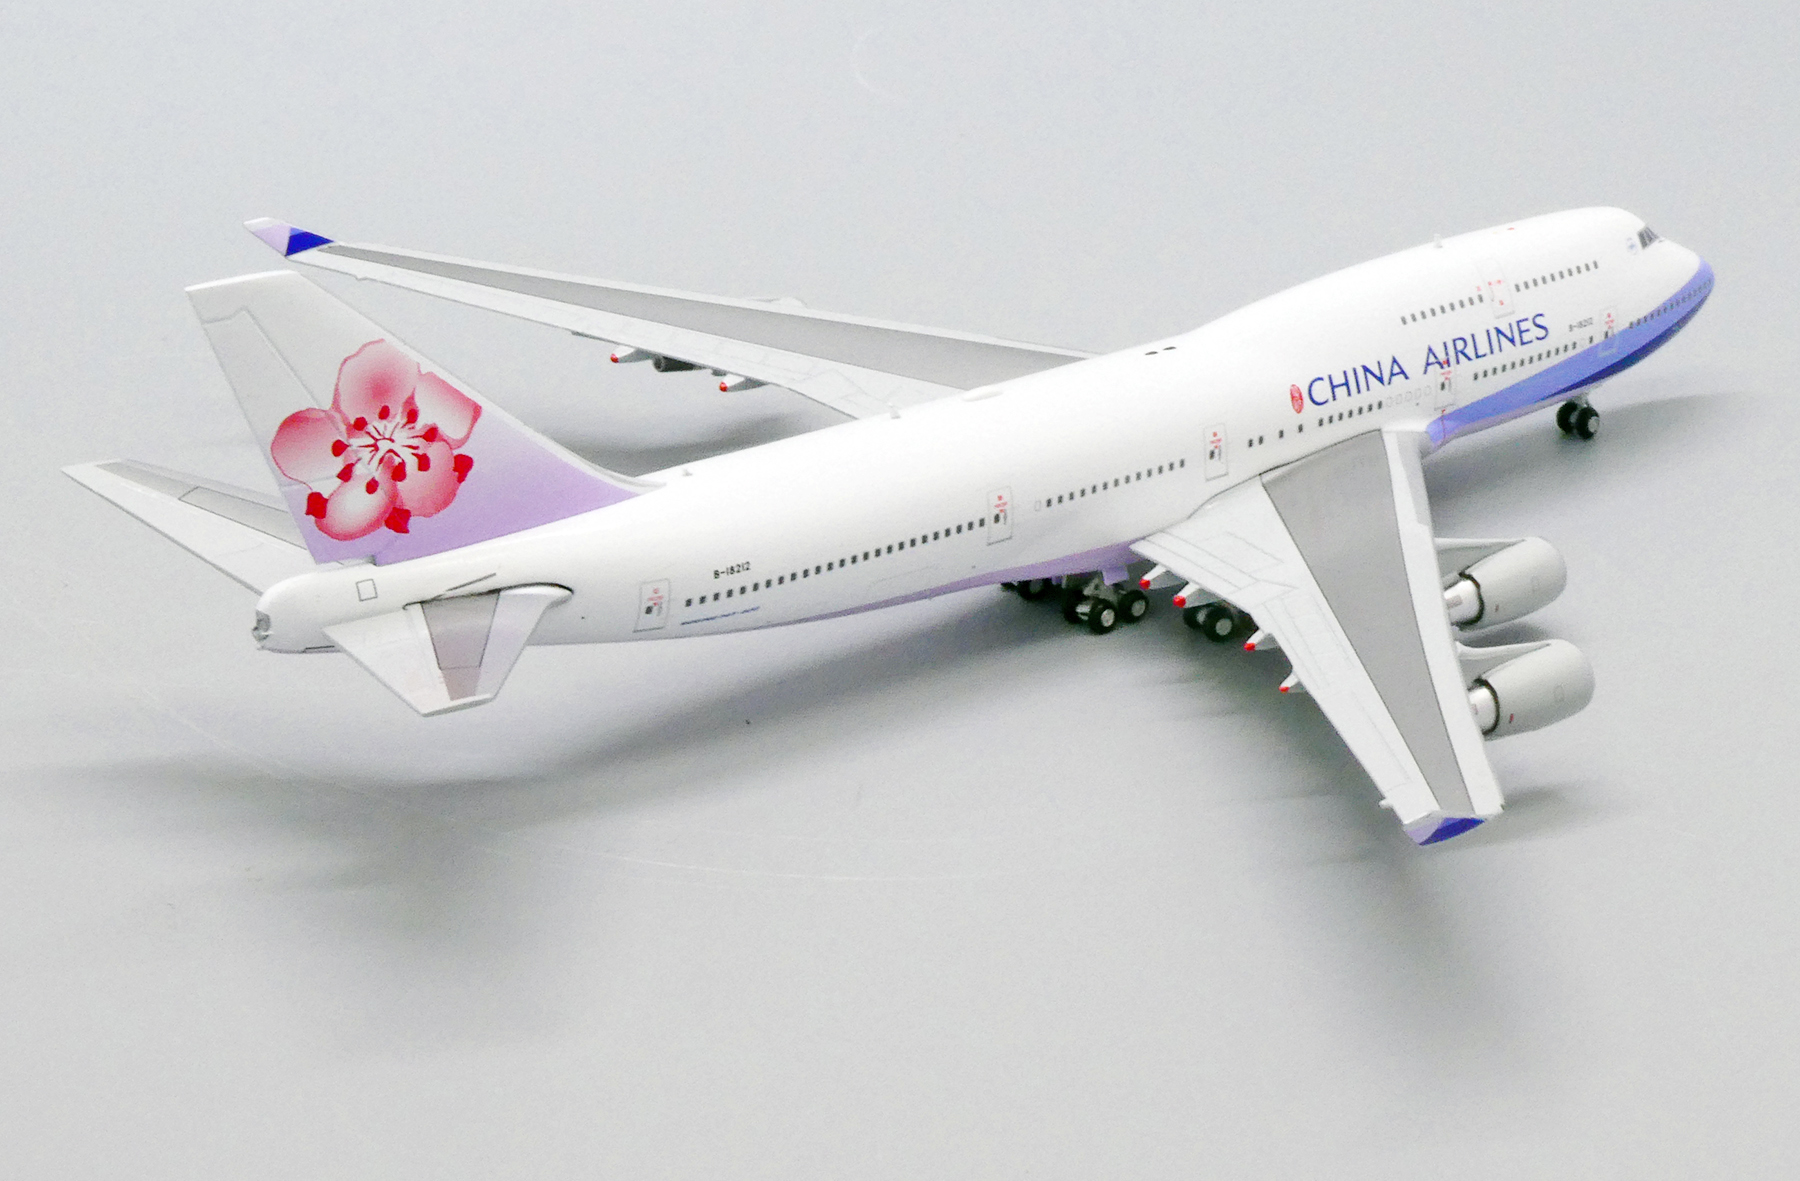 ScaleModelStore.com :: JC Wings 1:400 - XX4475 - China Airlines 